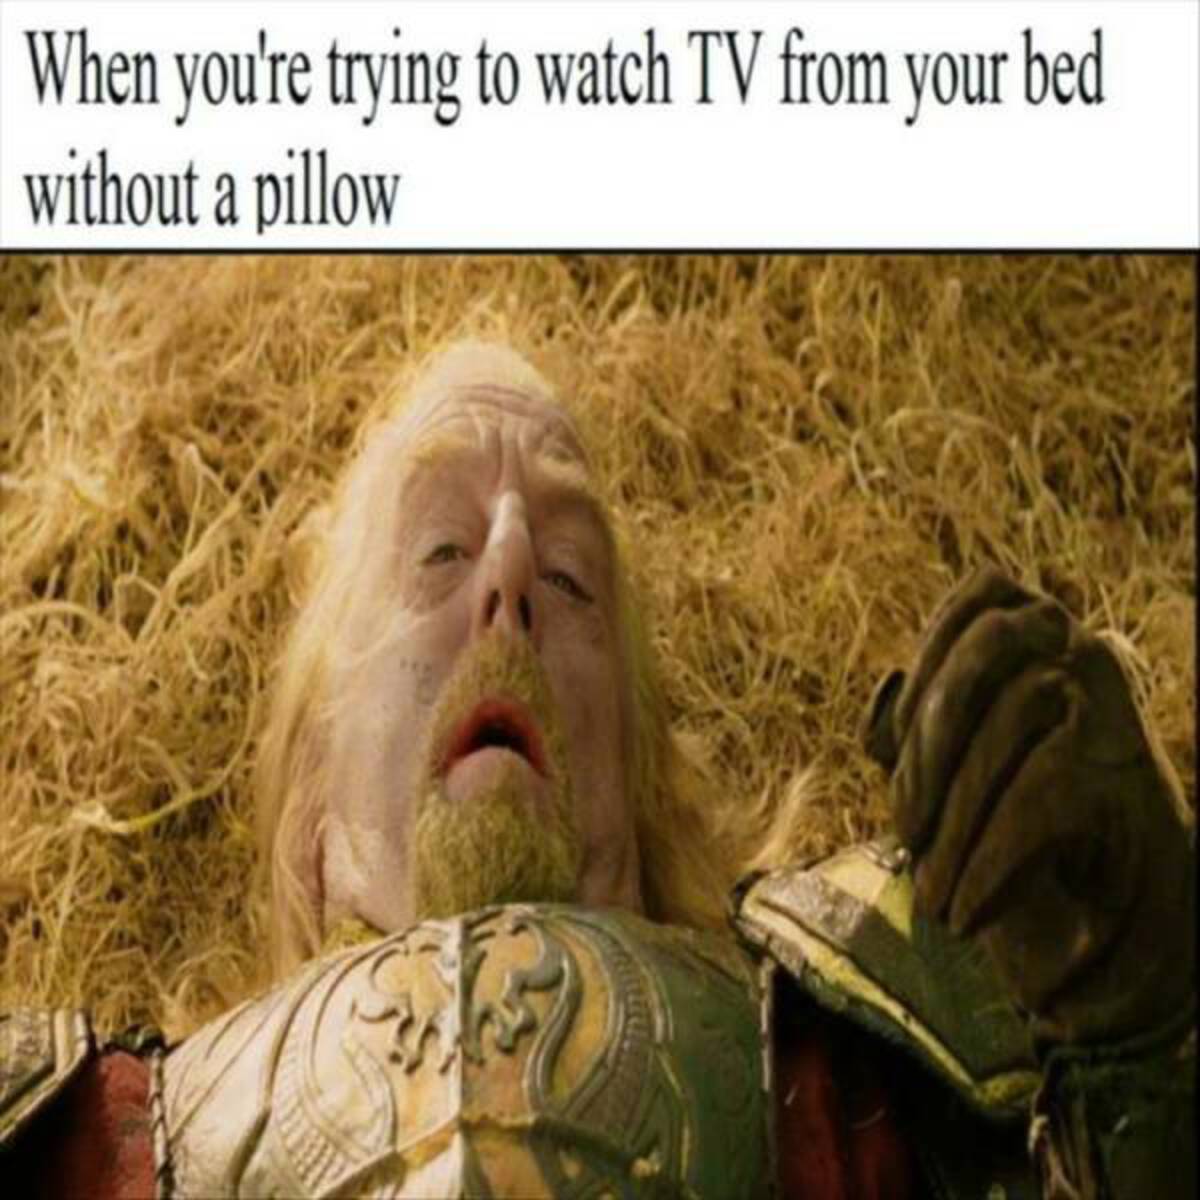 lotr pillow memes - When you're trying to watch Tv from your bed without a pillow